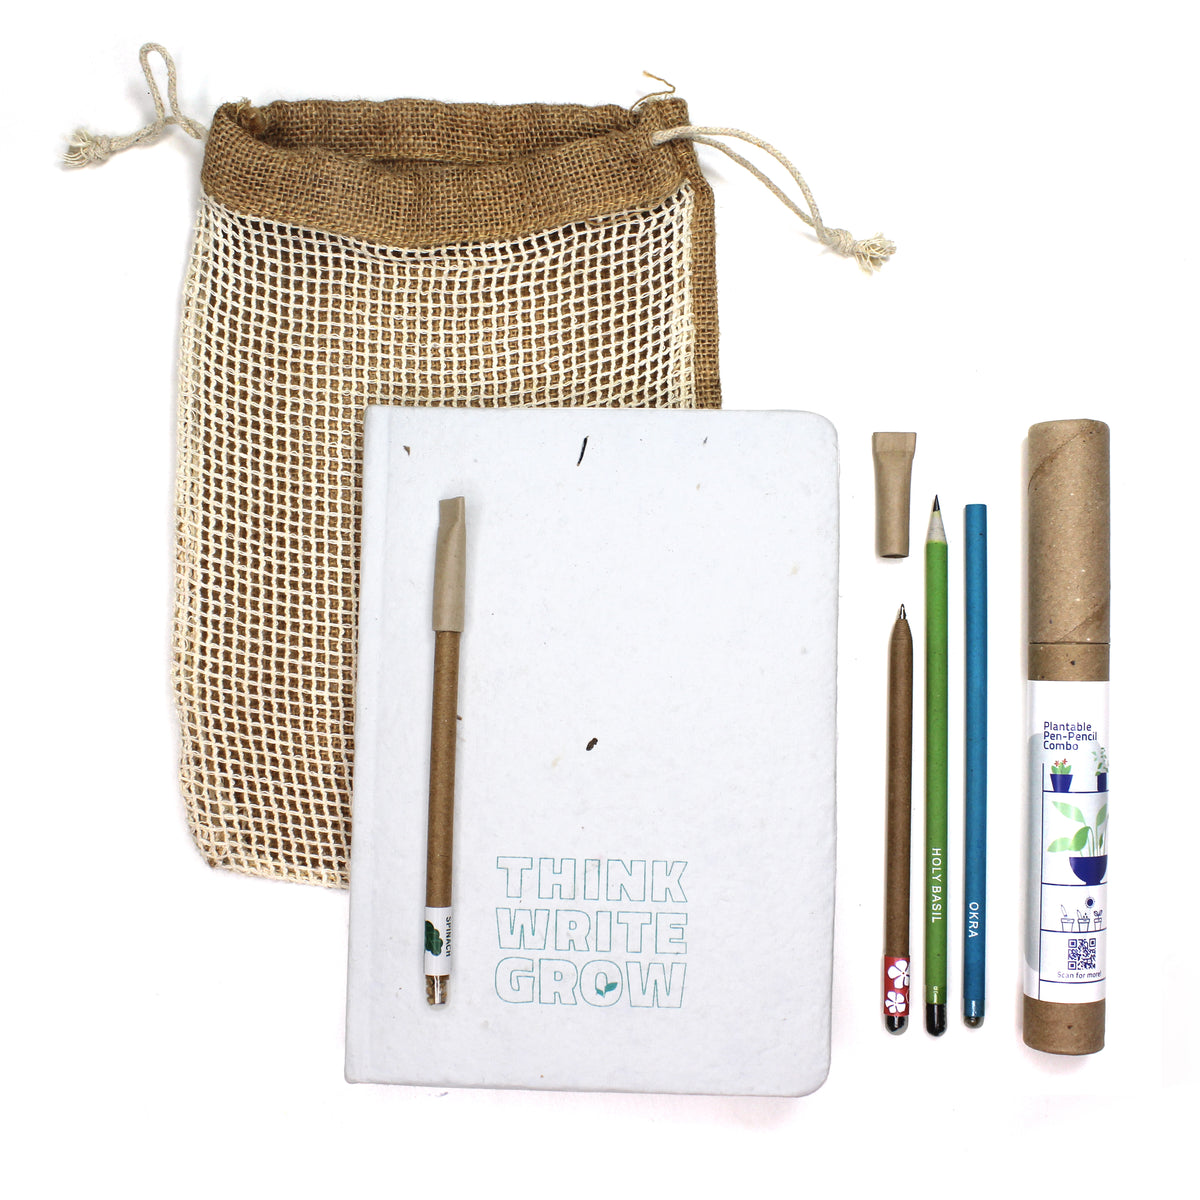 Plantable kit for corporates- with reusable bag